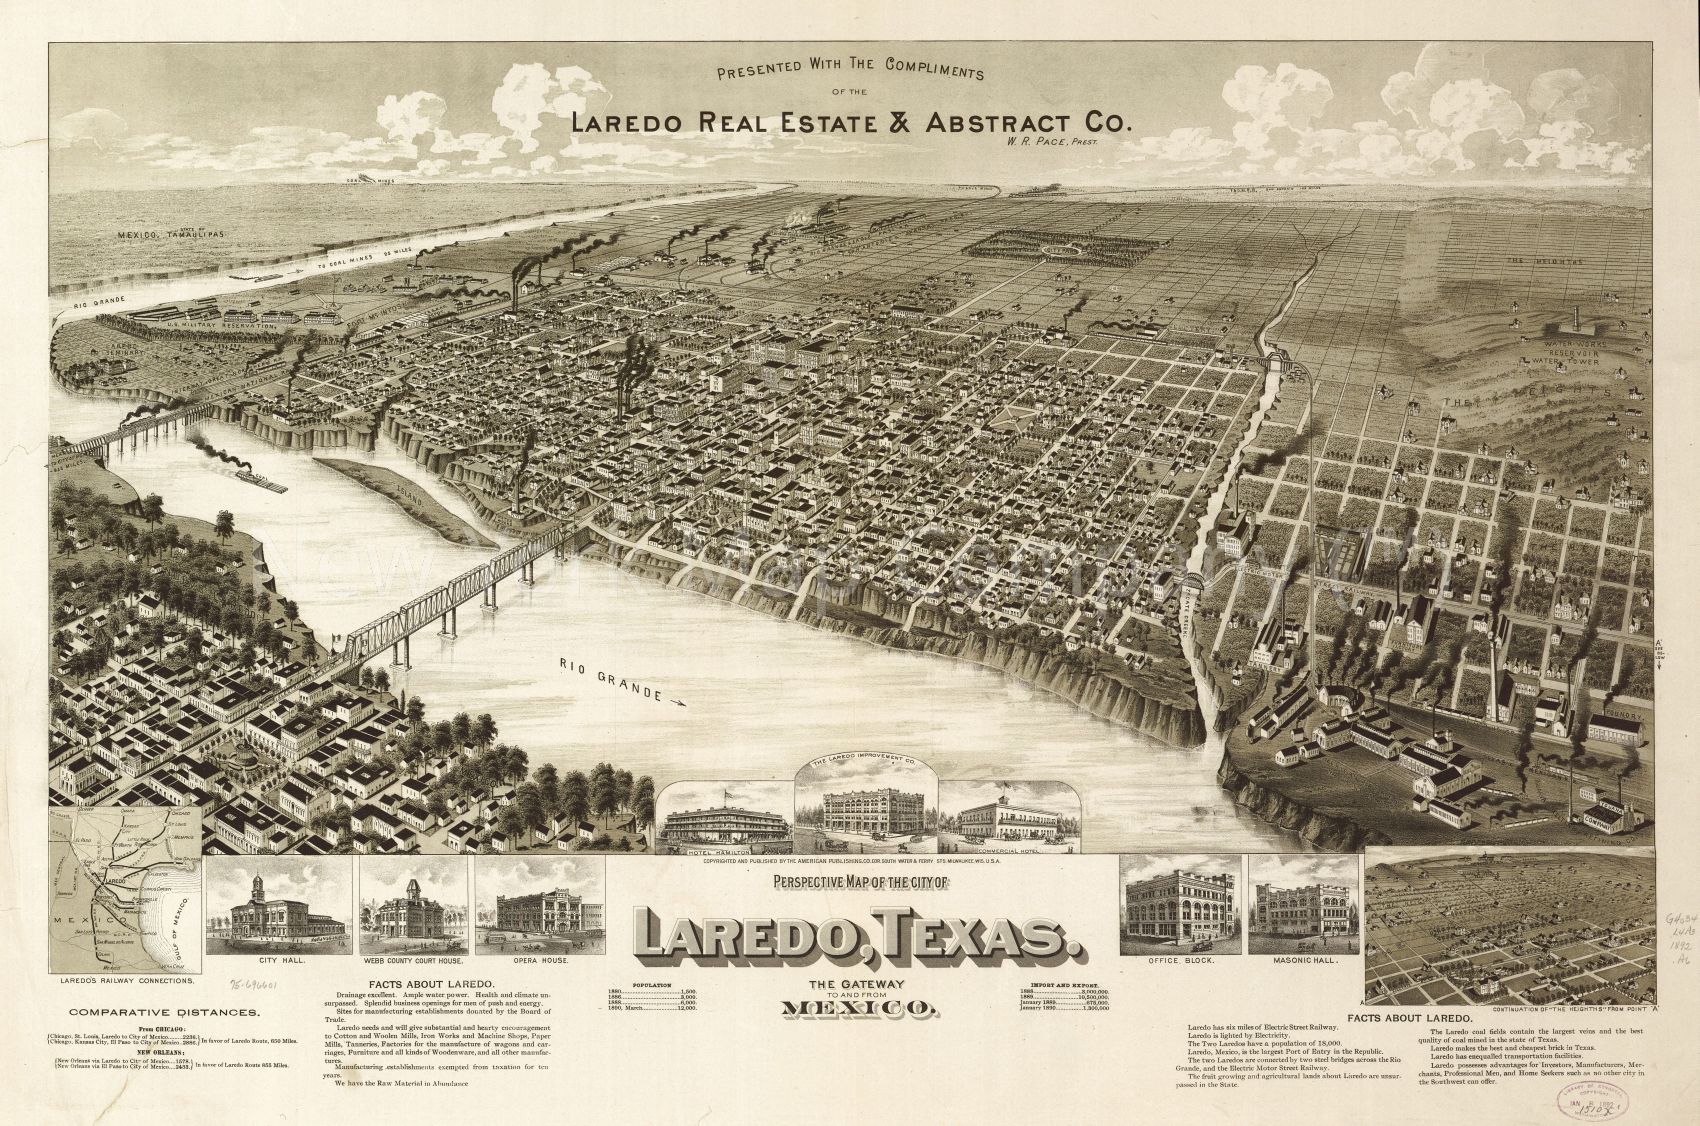 1892 map Perspective map of the city of Laredo, Texas, the Gateway to and from Mexico. Laredo's railway connections,. Map Subjects: Laredo | Laredo | Texas |